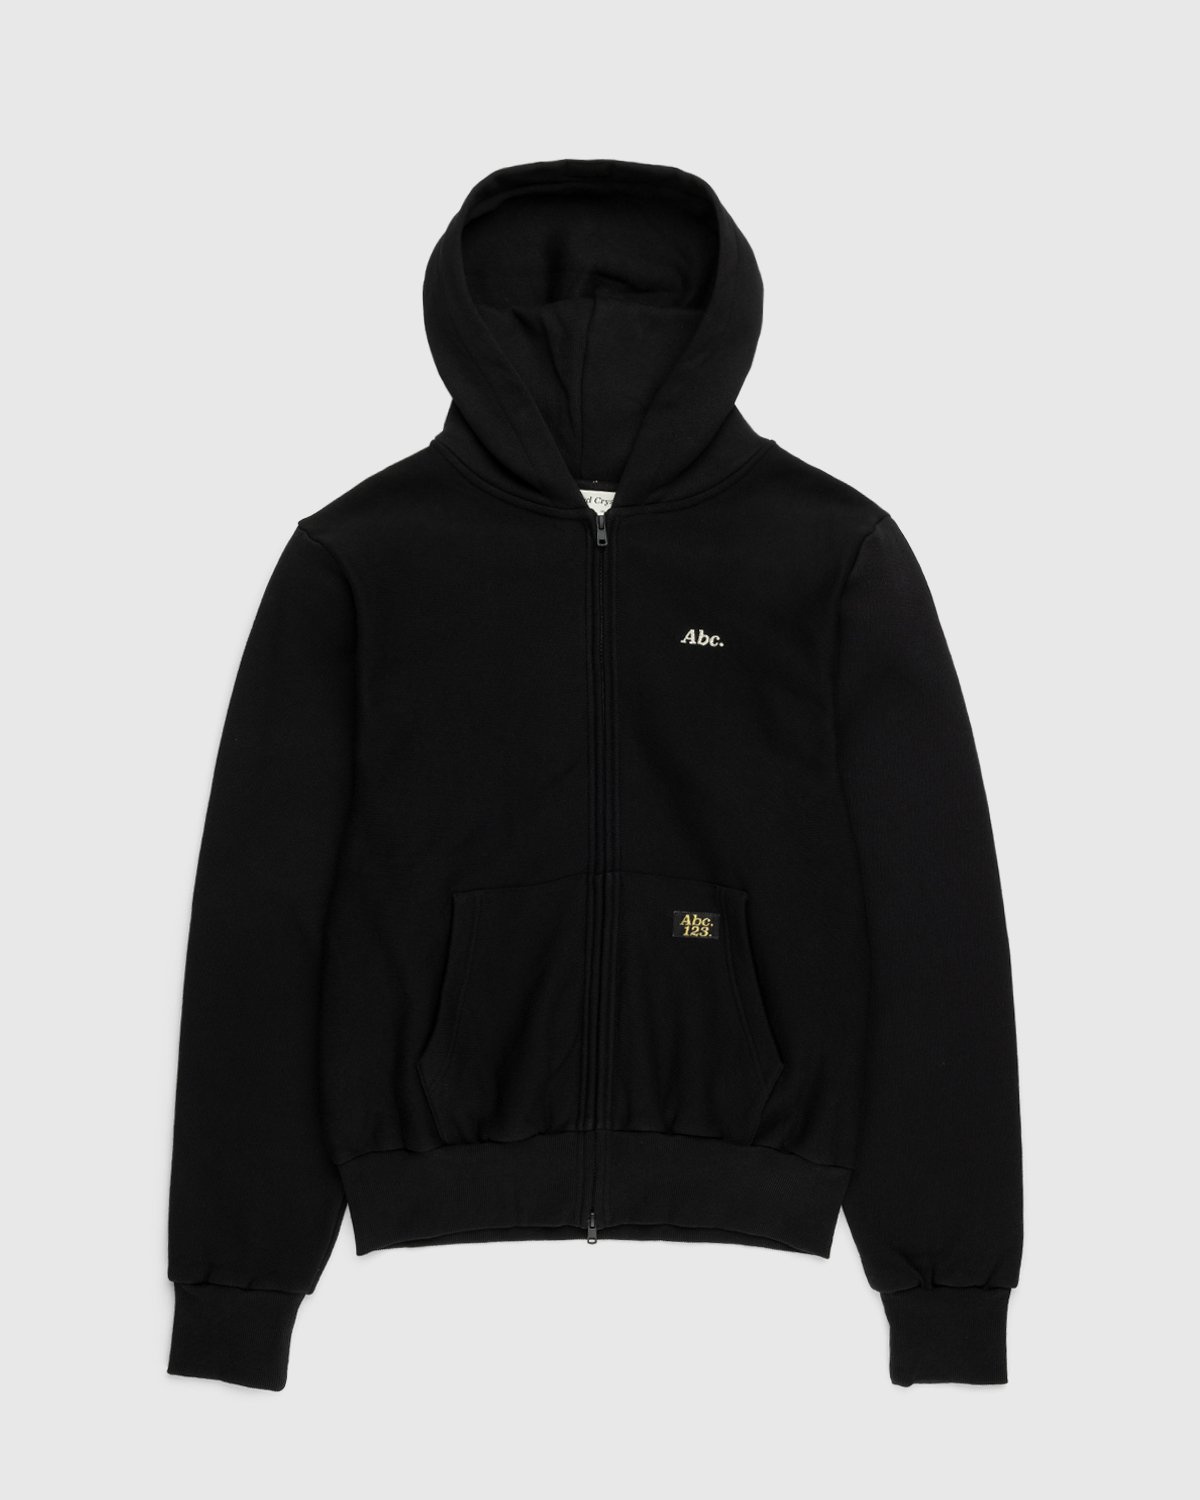 Abc. - Zip-Up French Terry Hoodie Anthracite - Clothing - Black - Image 1